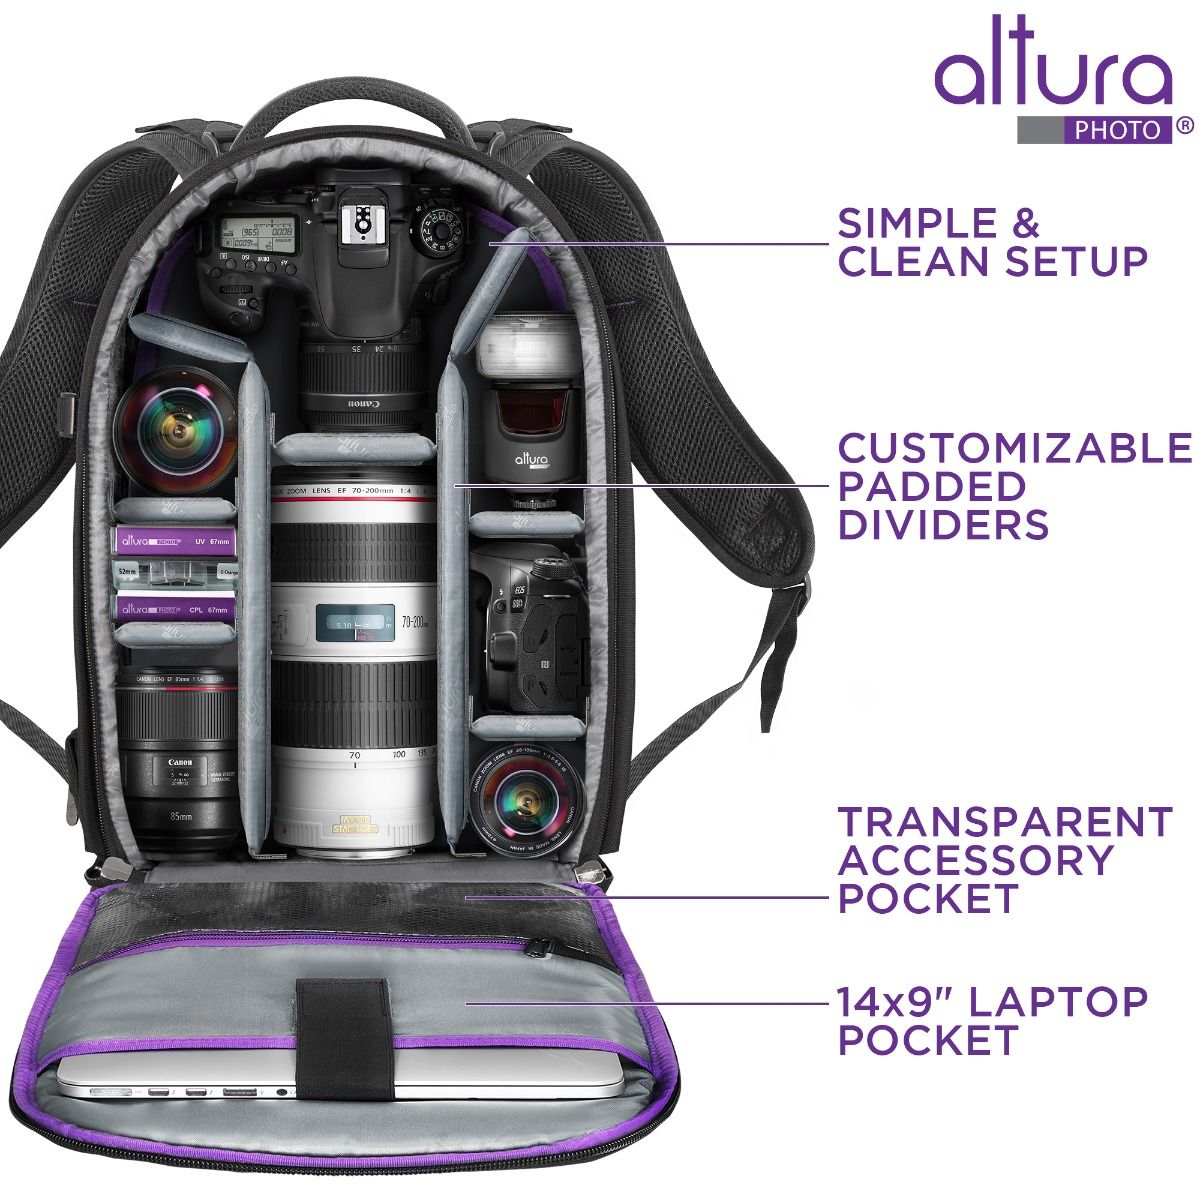 Camera Backpack with Laptop Case for Canon Nikon Sony Mirrorless and DSLR  Camera, Flash Light and other Photography Accessories - Large Capacity Black  Bag with Tripod Holder by Altura Photo